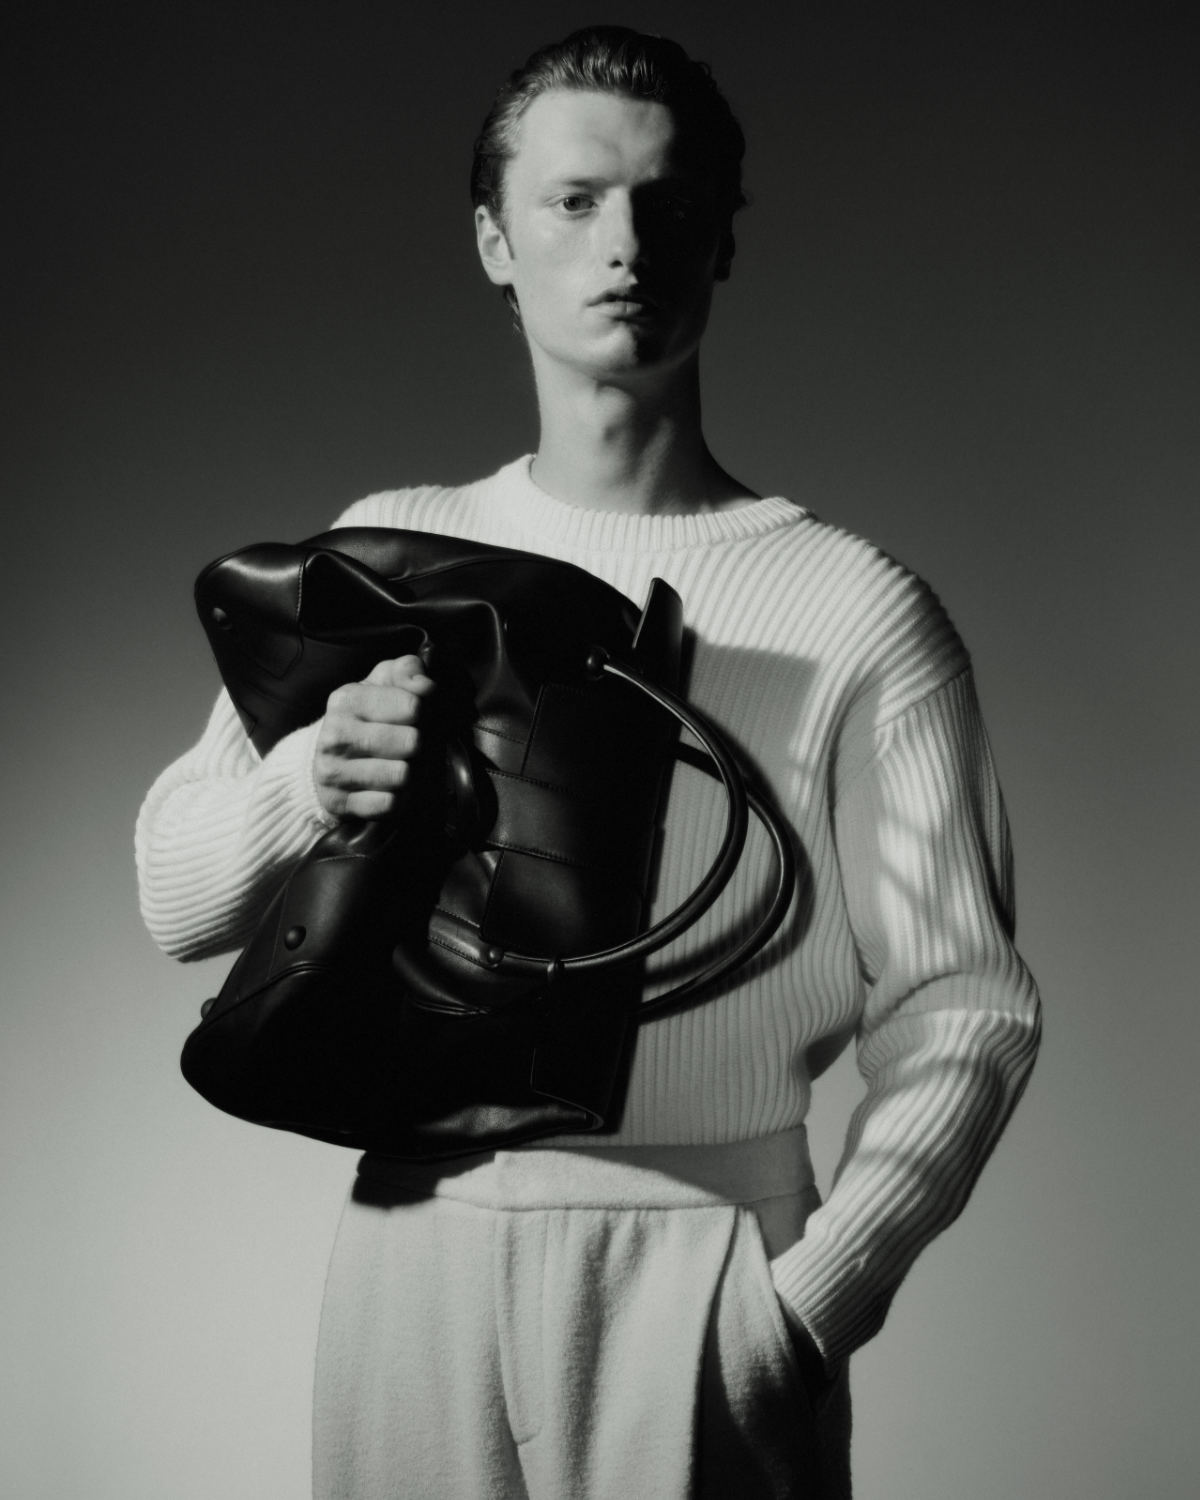 Delvaux Collaborates With JEANCOLONNA On A New L’XXL Bag